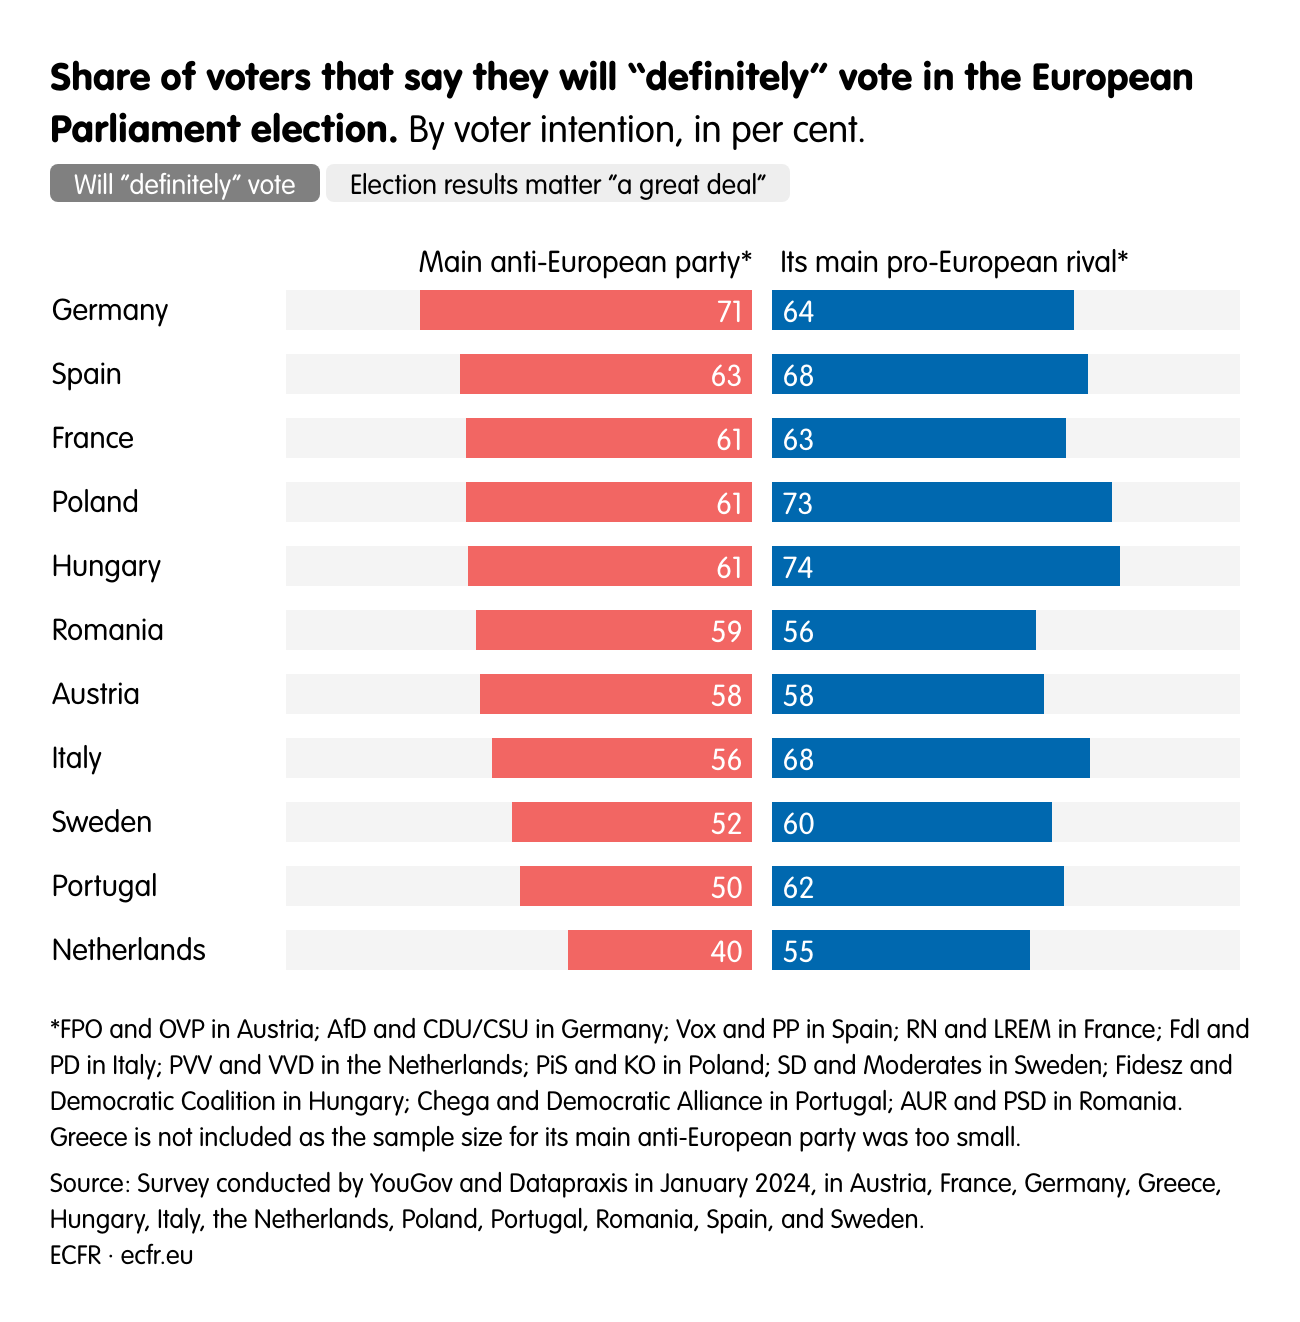 Share of voters that say they will “definitely” vote in the European Parliament election. 